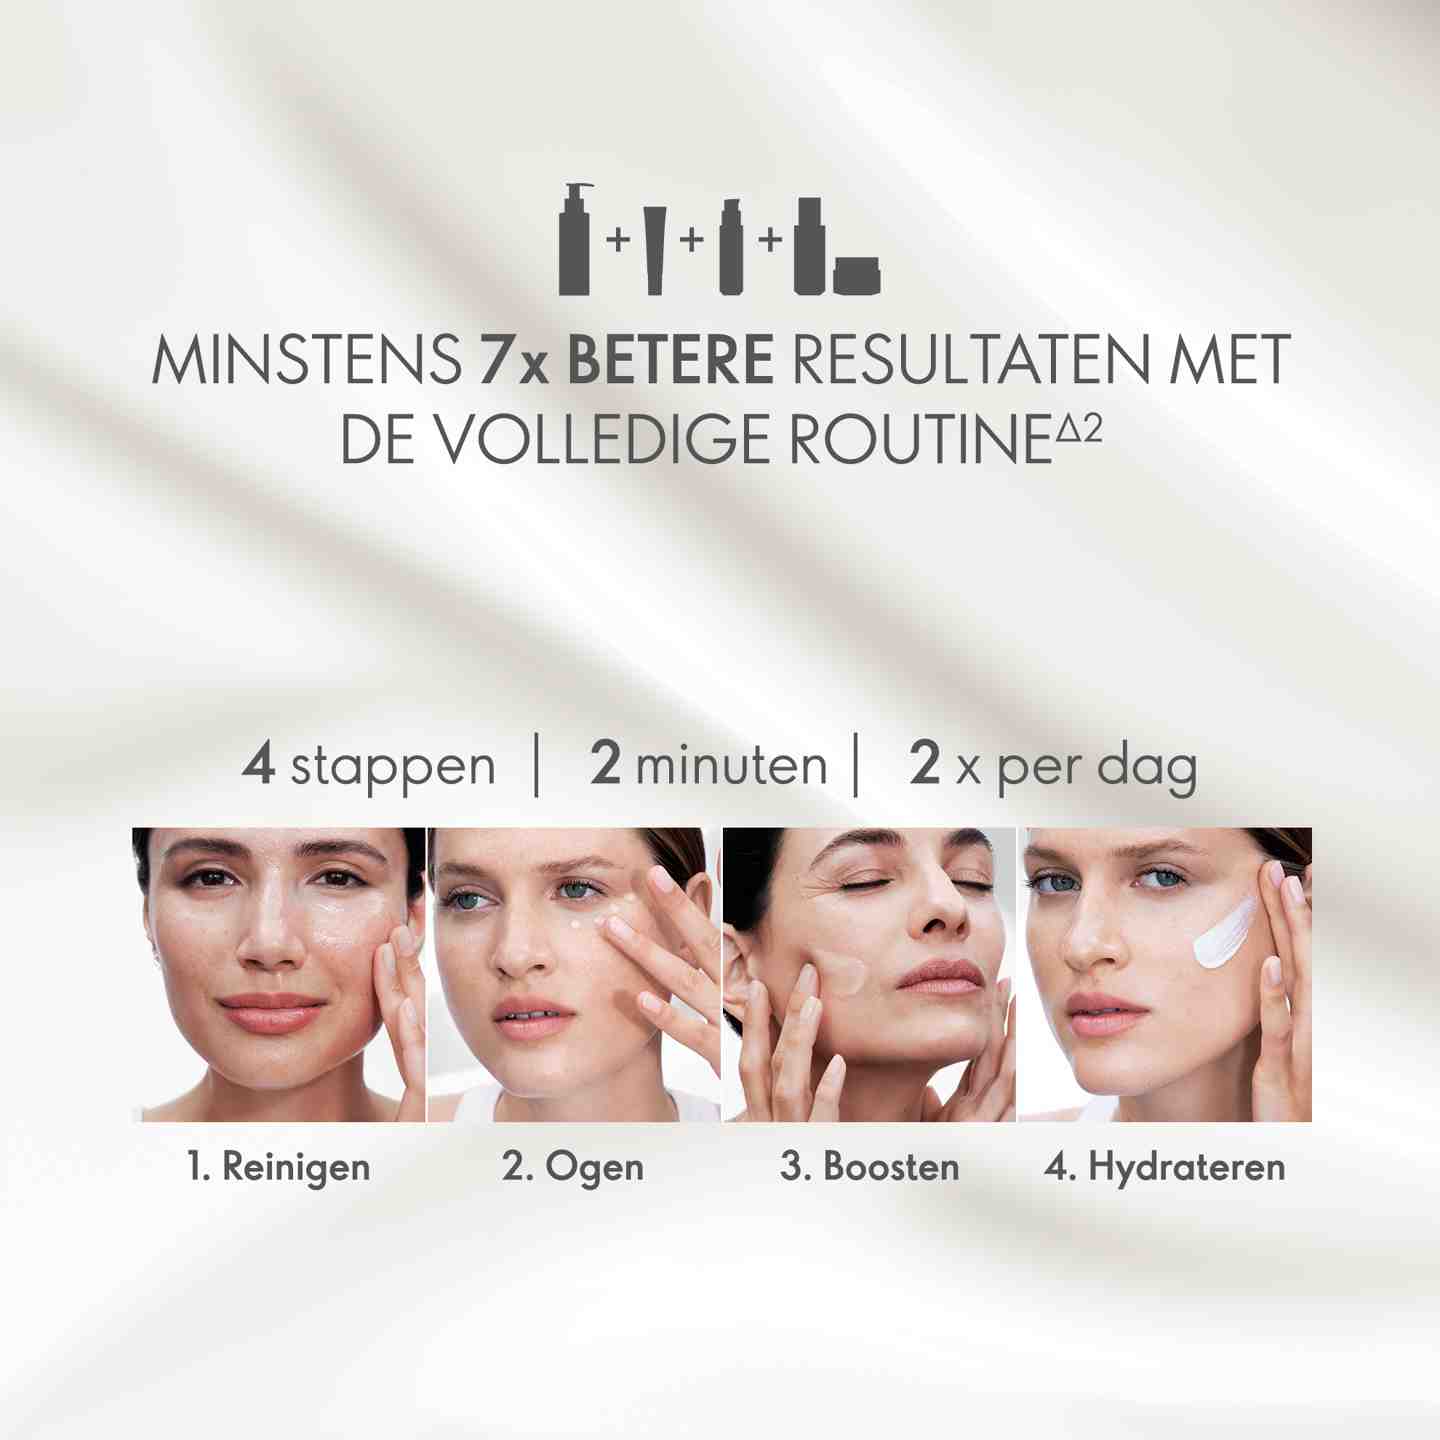 https://media-cdn.oriflame.com/productImage?externalMediaId=product-management-media%2fProducts%2f45608%2fNL%2f45608_5.png&id=17563720&version=1